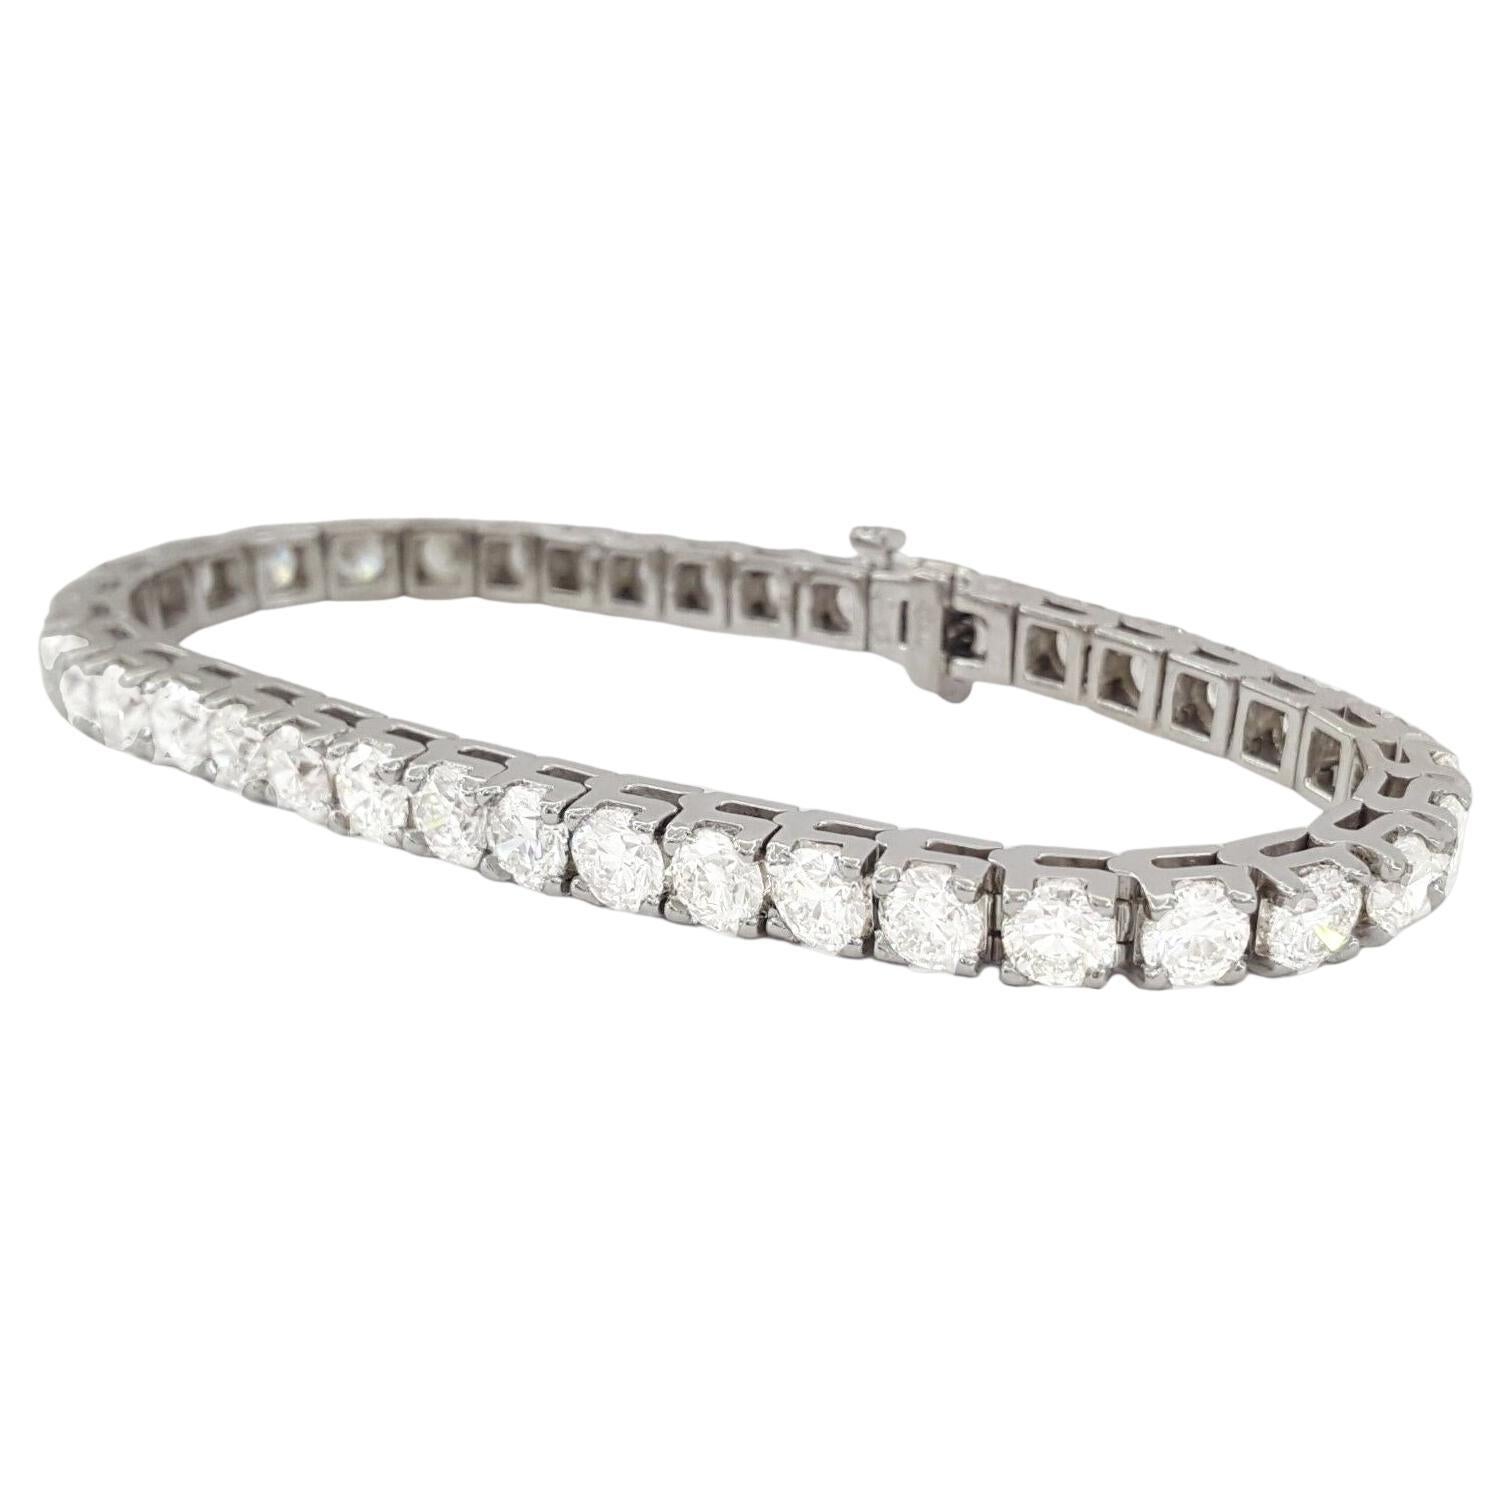 Indulge in the timeless allure of this platinum tennis bracelet, a masterpiece of elegance and sophistication. Crafted with meticulous attention to detail, it showcases a mesmerizing collection of round diamonds totaling 17.03 carats in weight.
Each